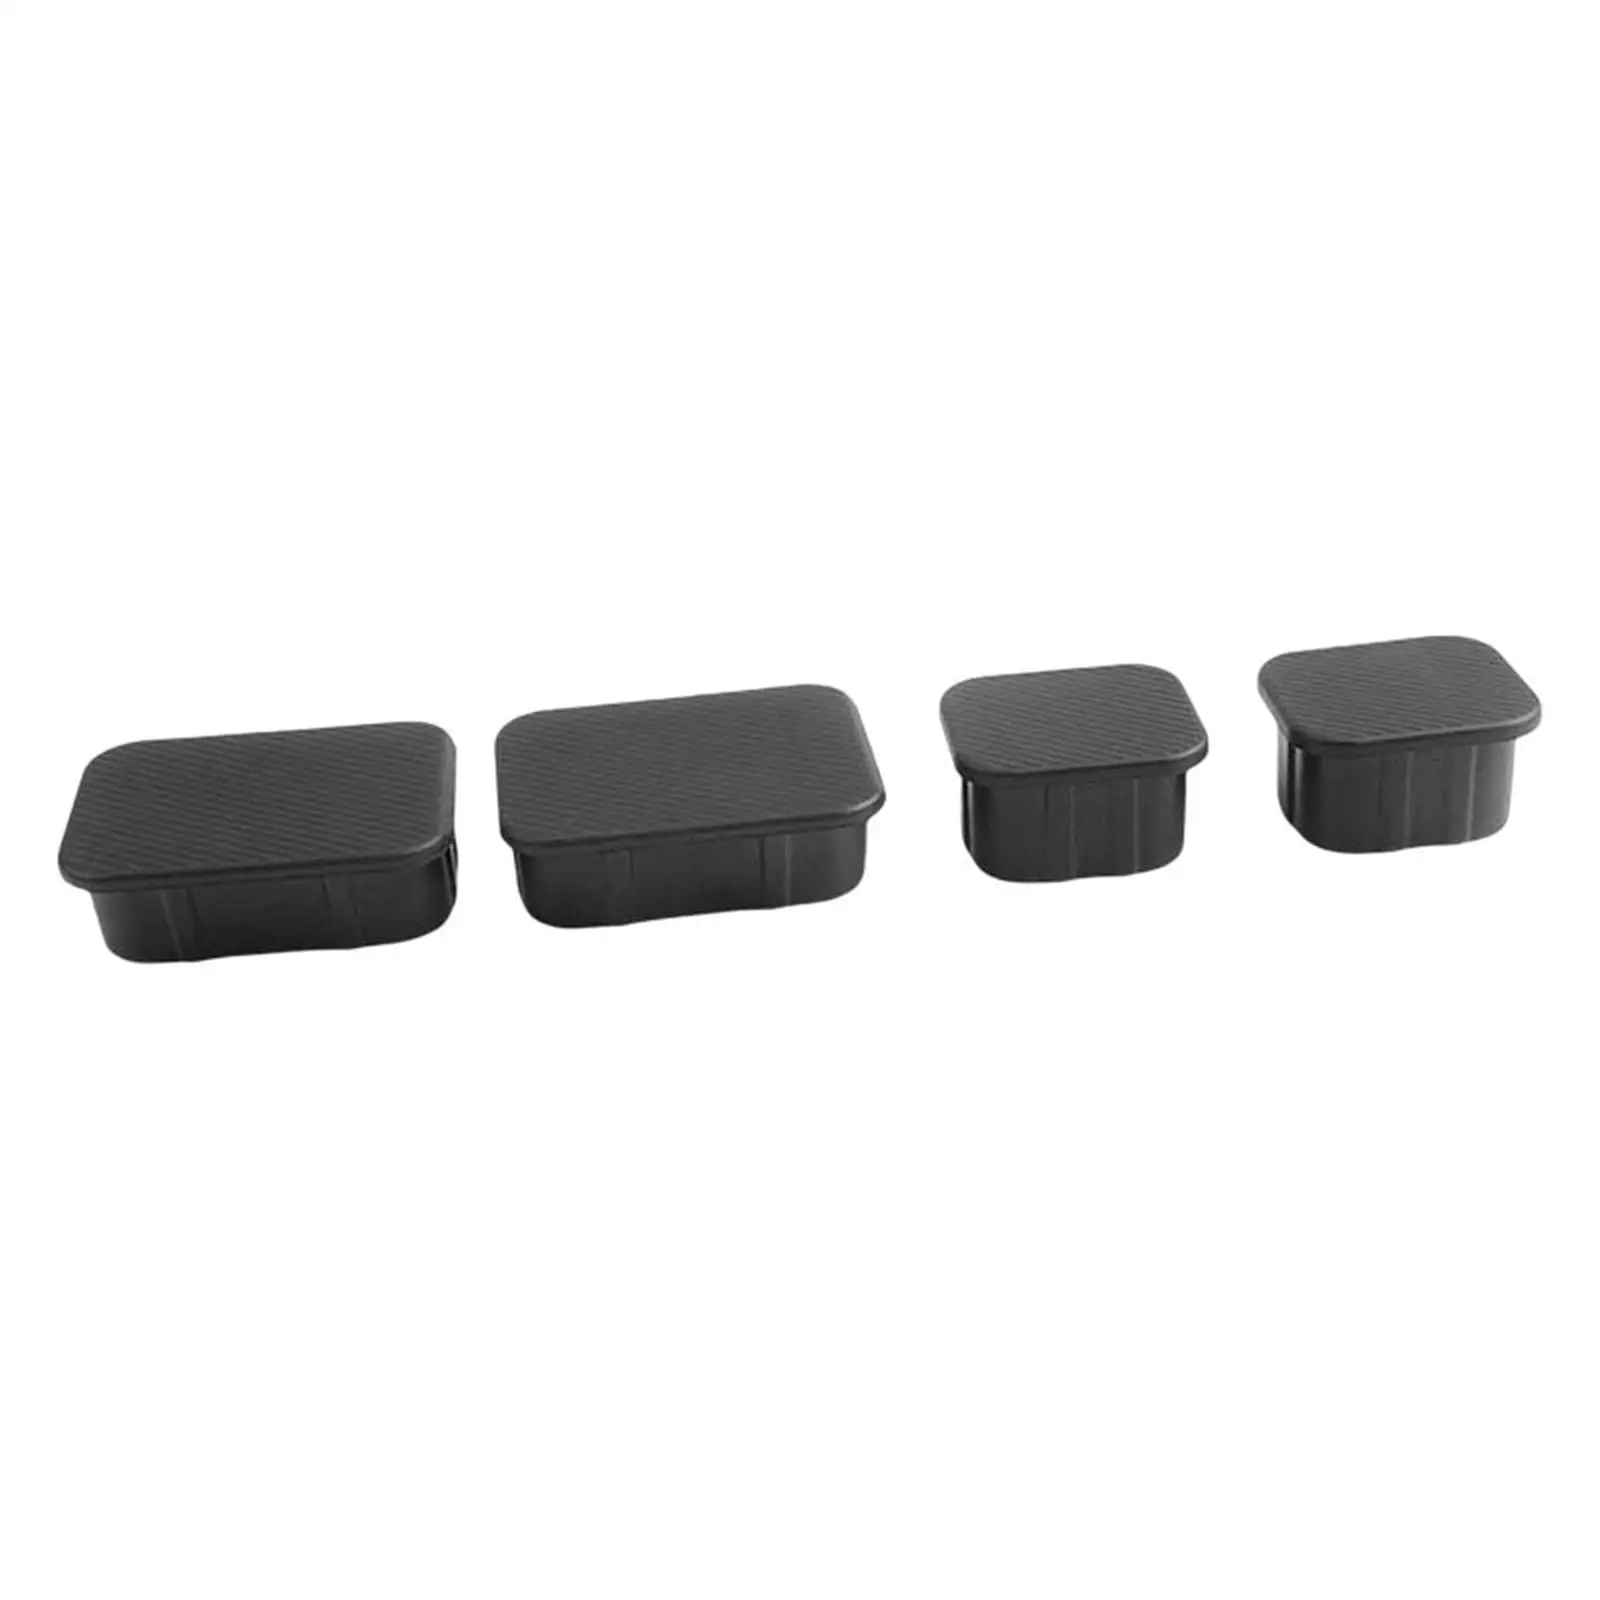 4x Front Axle Plug Easy to Install Rubber Cover Protection Black for Ford Bronco